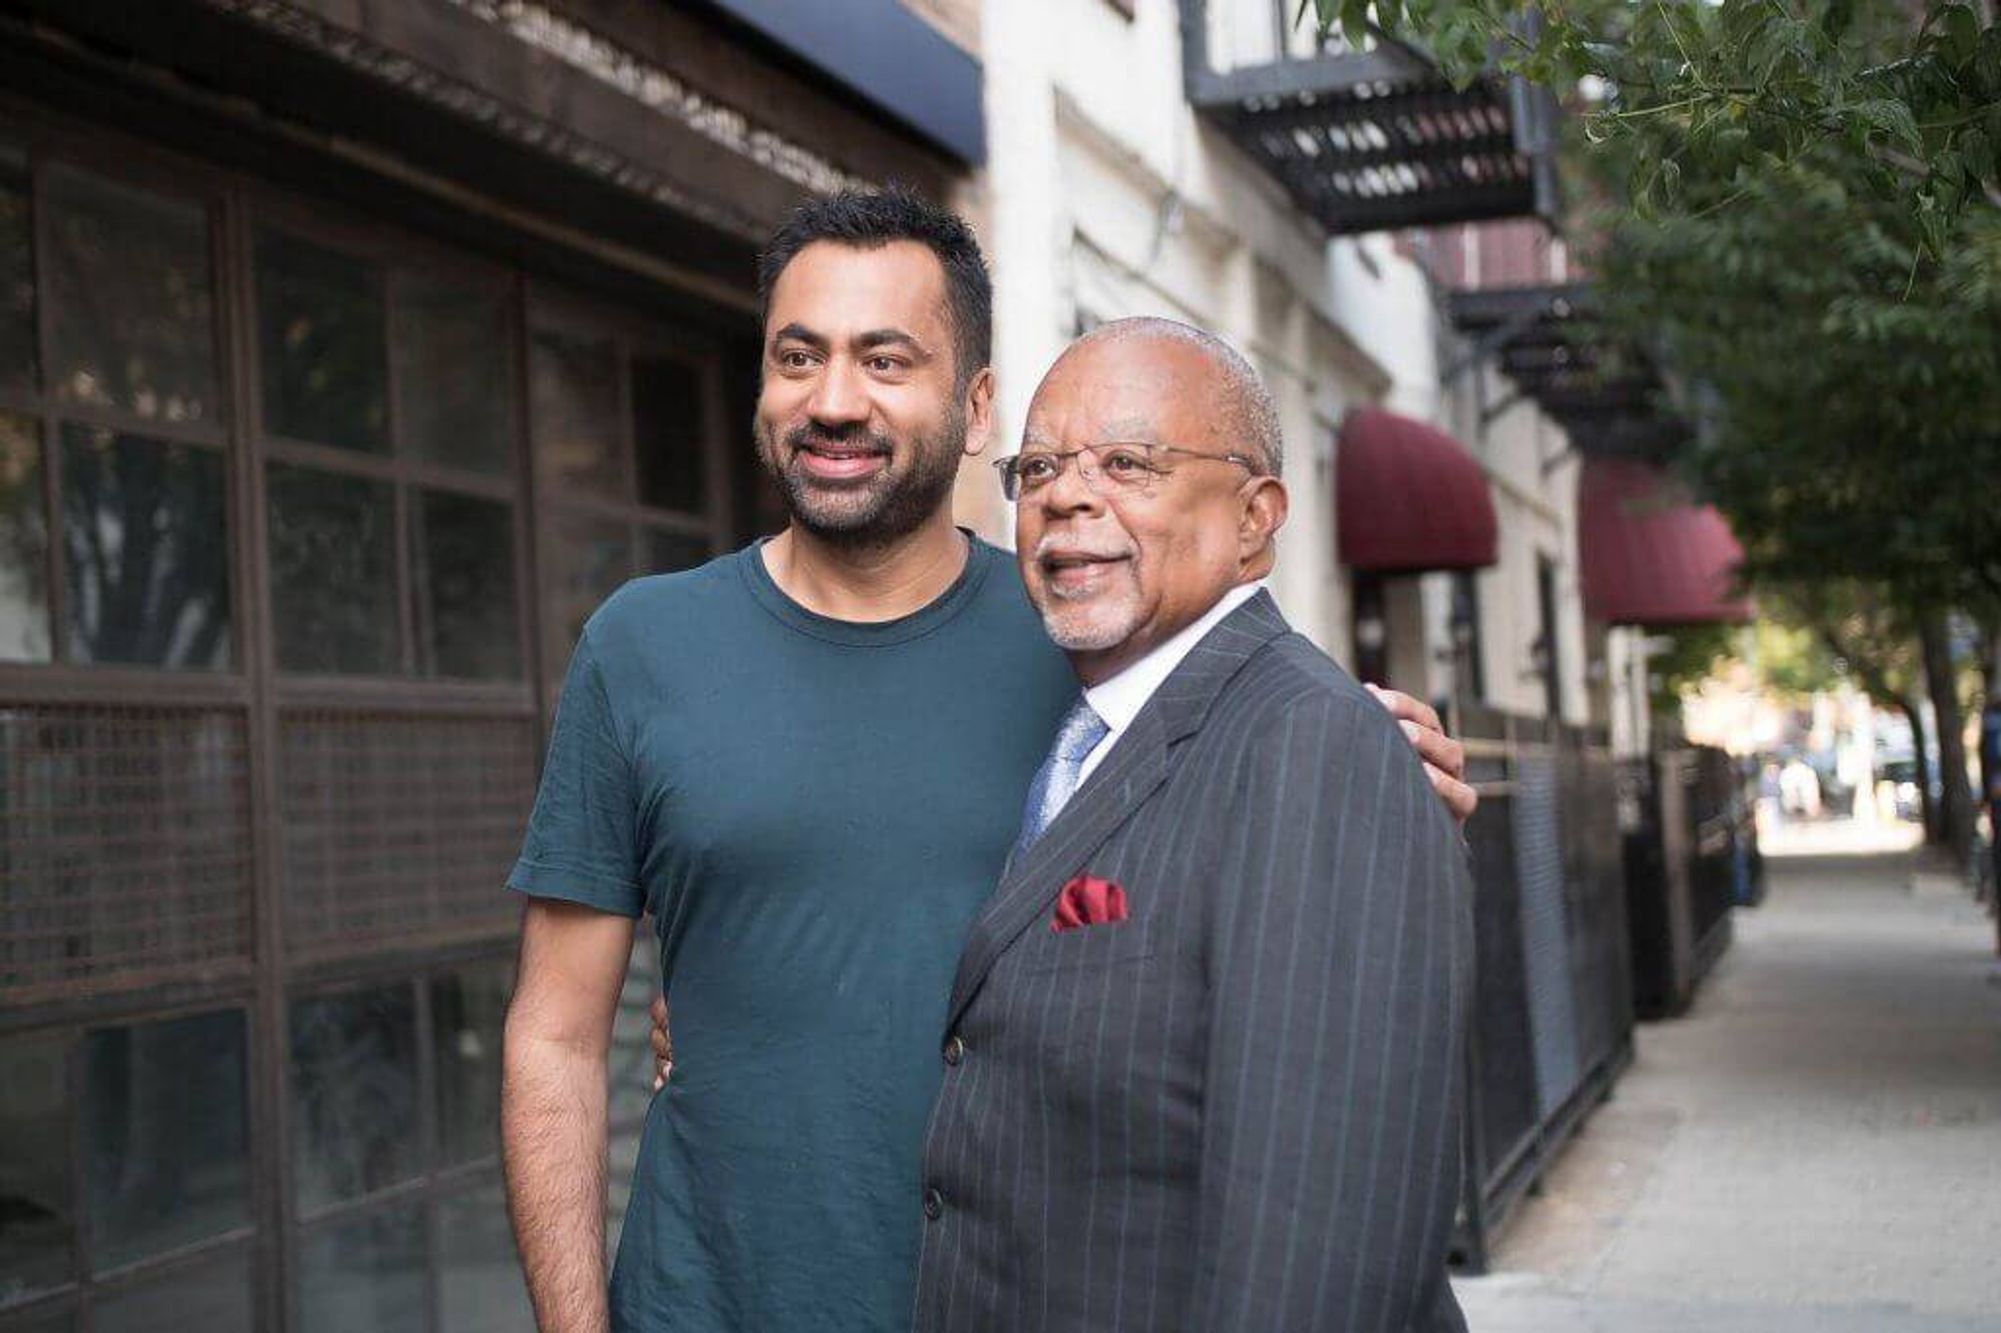 Finding Your Roots host Henry Louis Gates, Jr. with Kal Penn. PBS rewire